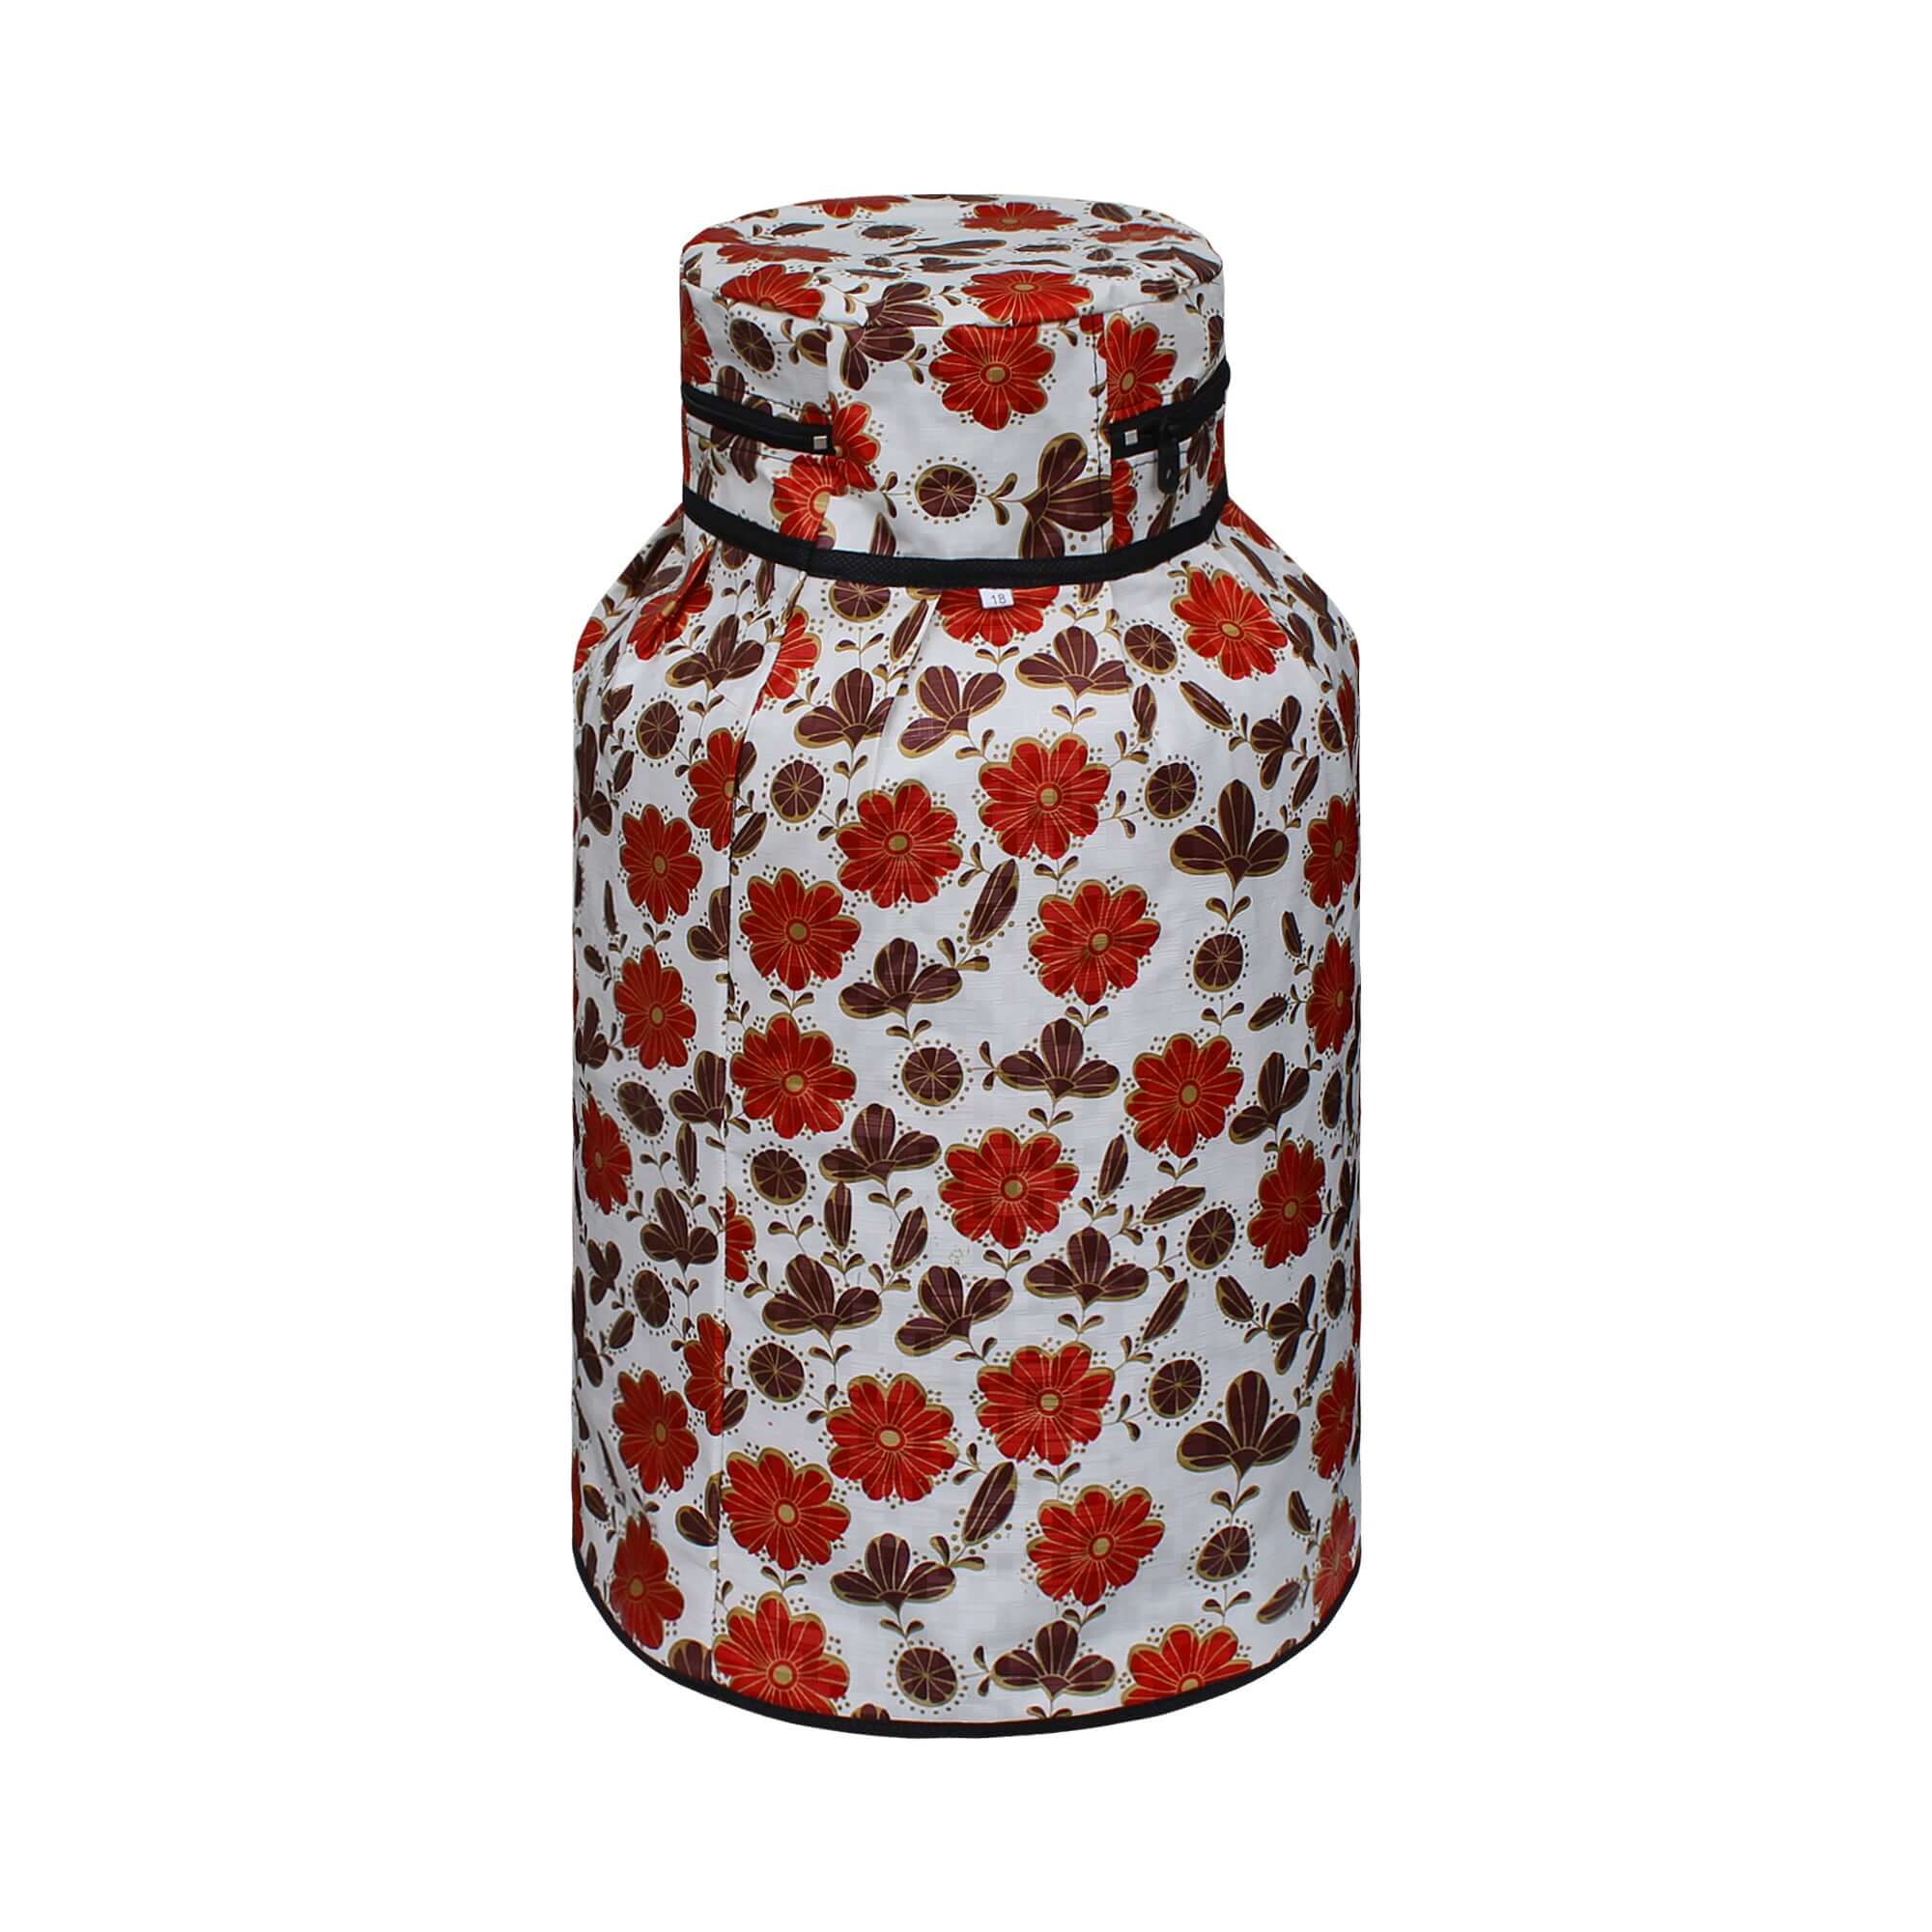 LPG Gas Cylinder Cover, SA20 - Dream Care Furnishings Private Limited